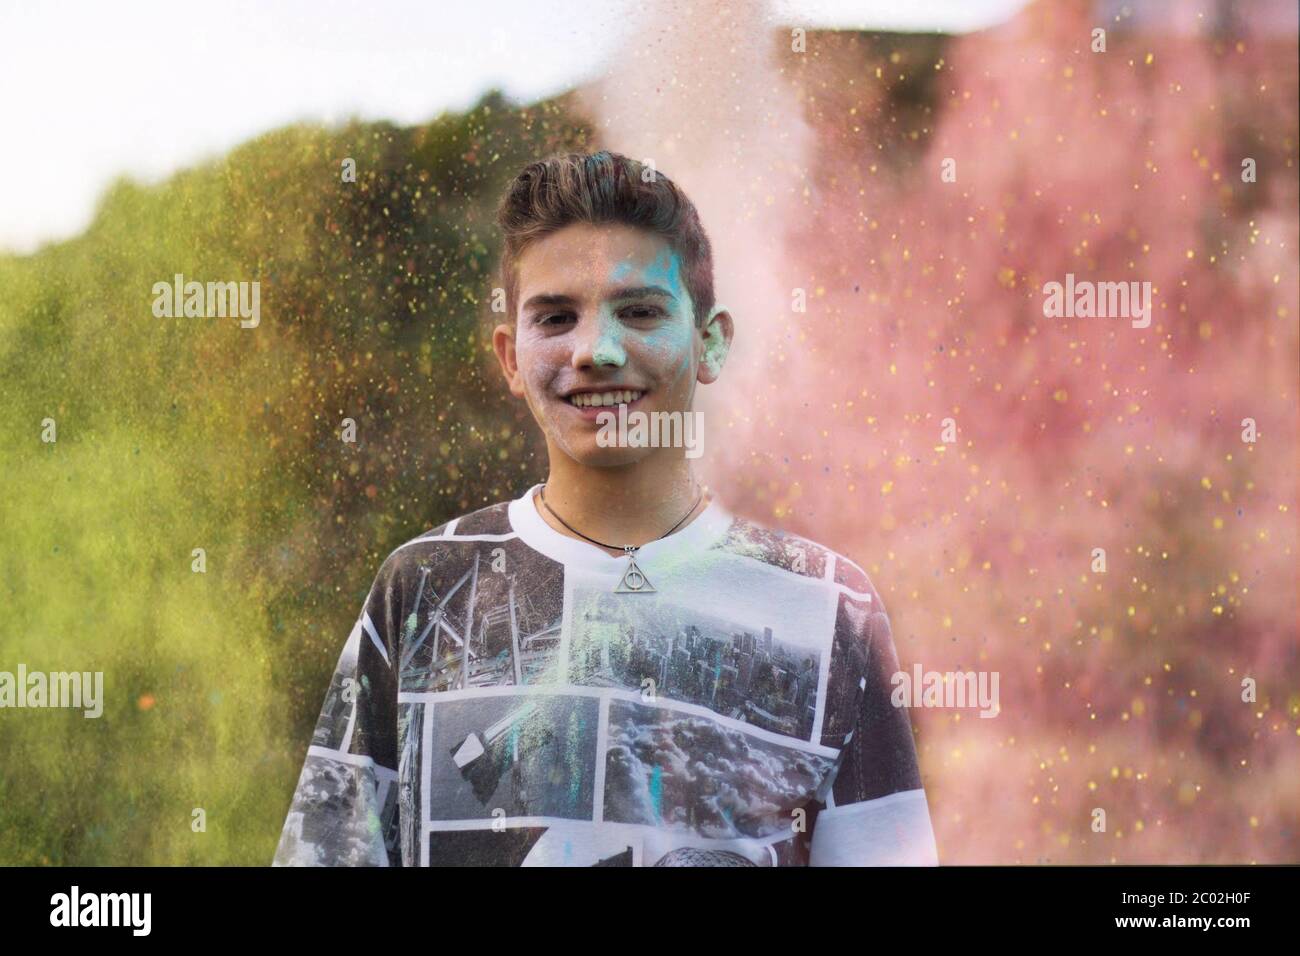 Boy with holi dust in a festival. Stock Photo